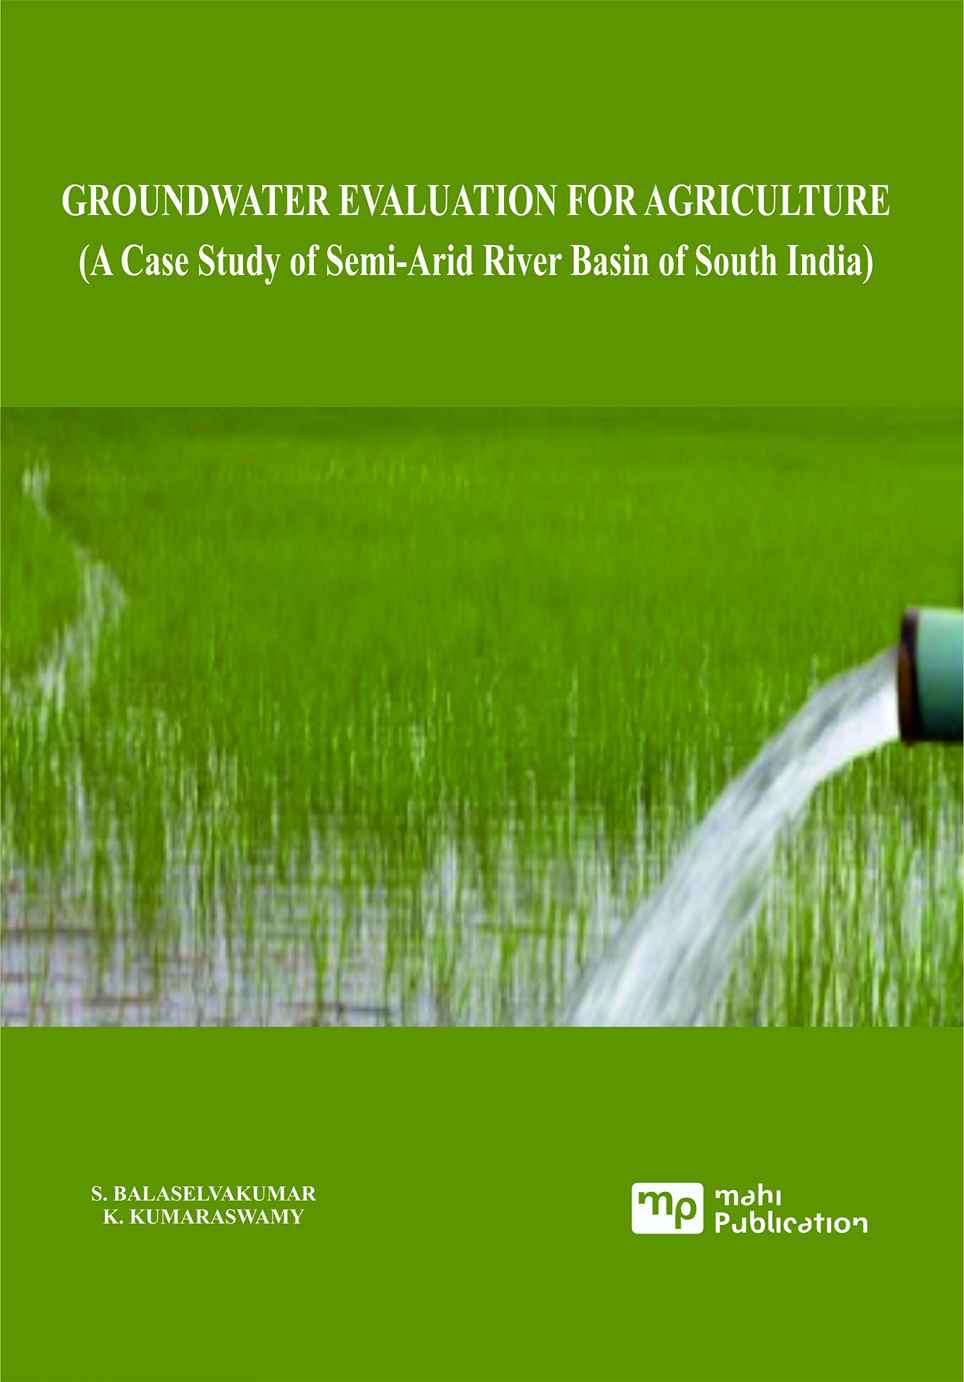 GROUNDWATER EVALUATION FOR AGRICULTURE (A Case Study of Semi-Arid River Basin of South India )